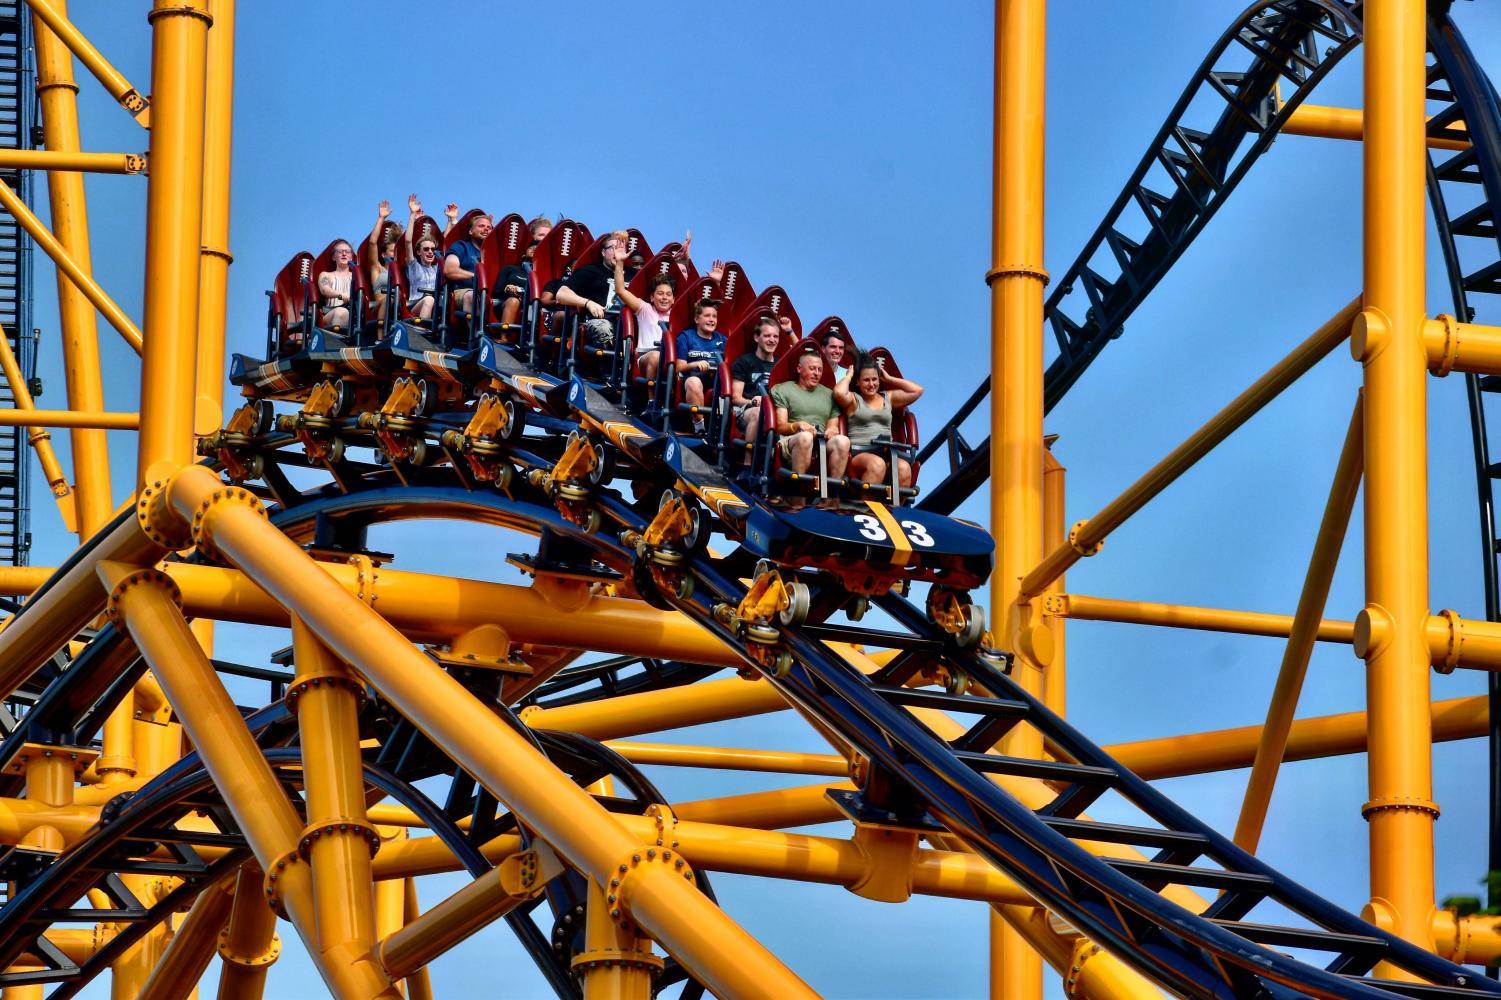 Kennywood Park opens with new roller coaster, updated COVID19 policies